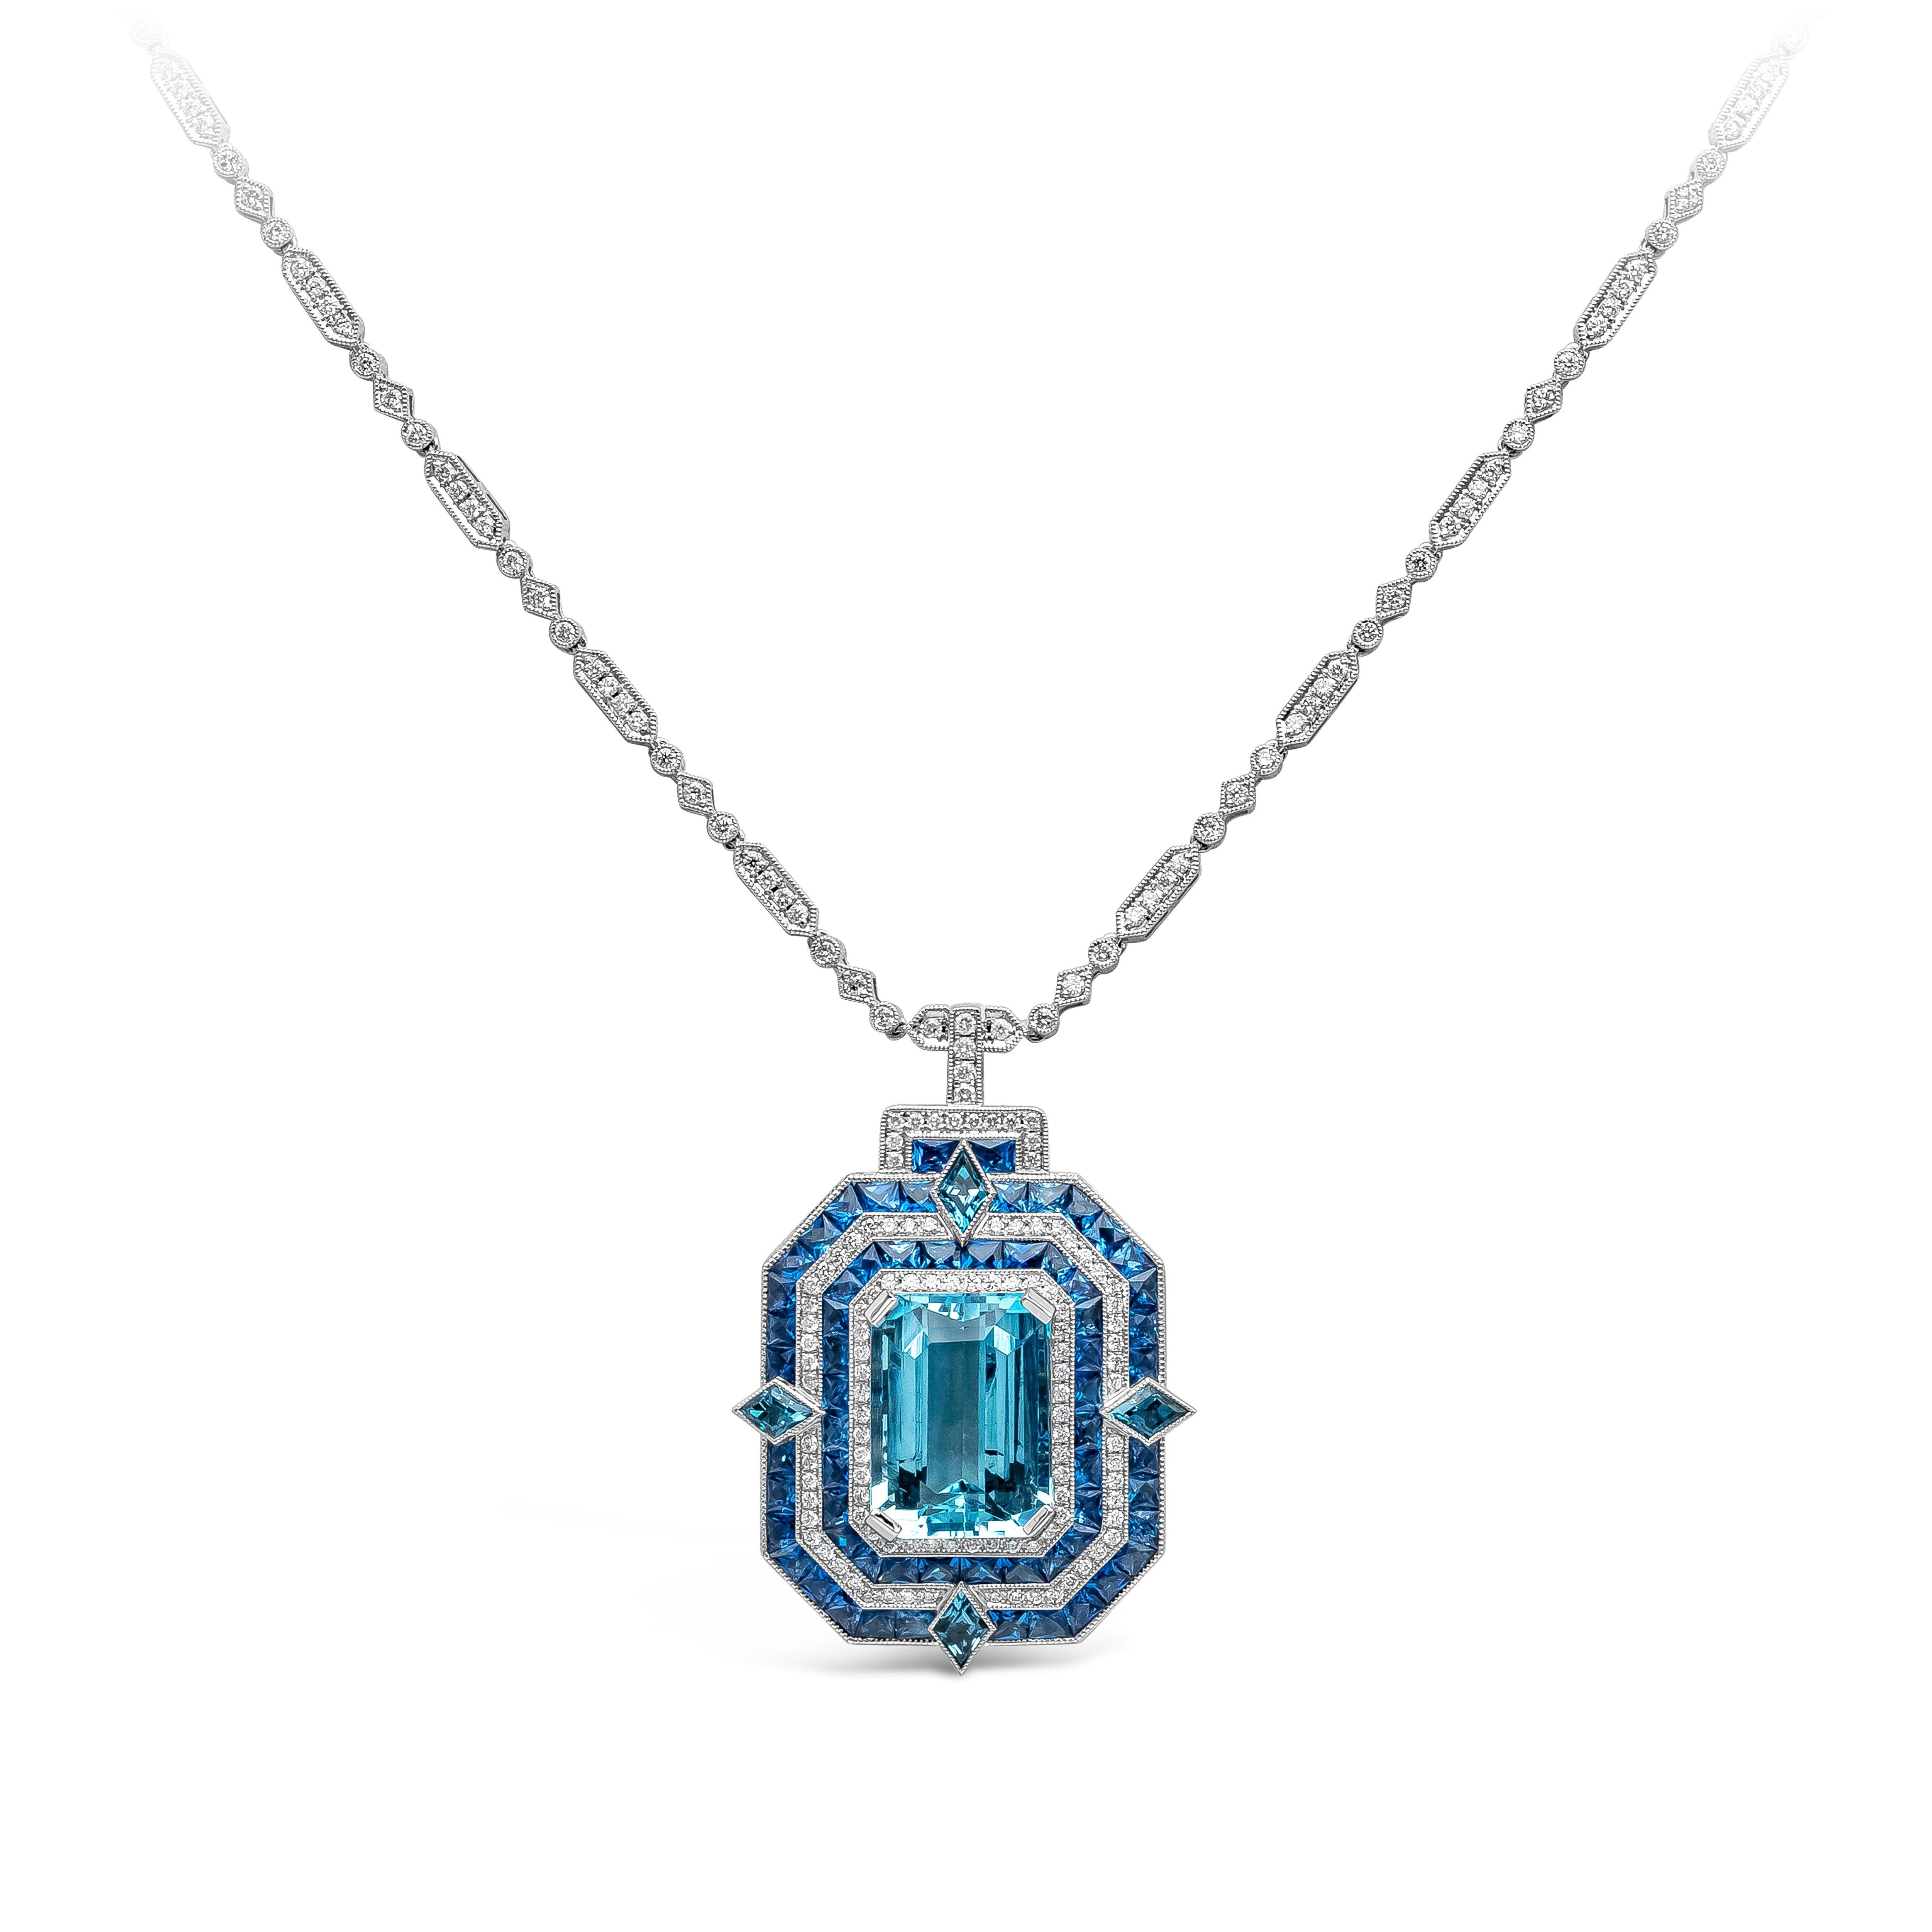 A beautiful and a statement piece of jewelry showcasing a 9.00 carat emerald cut aquamarine, accented by vibrant blue sapphires, kite cut London topaz, and round brilliant diamonds. The gemstones are set in an intricately-designed pendant and